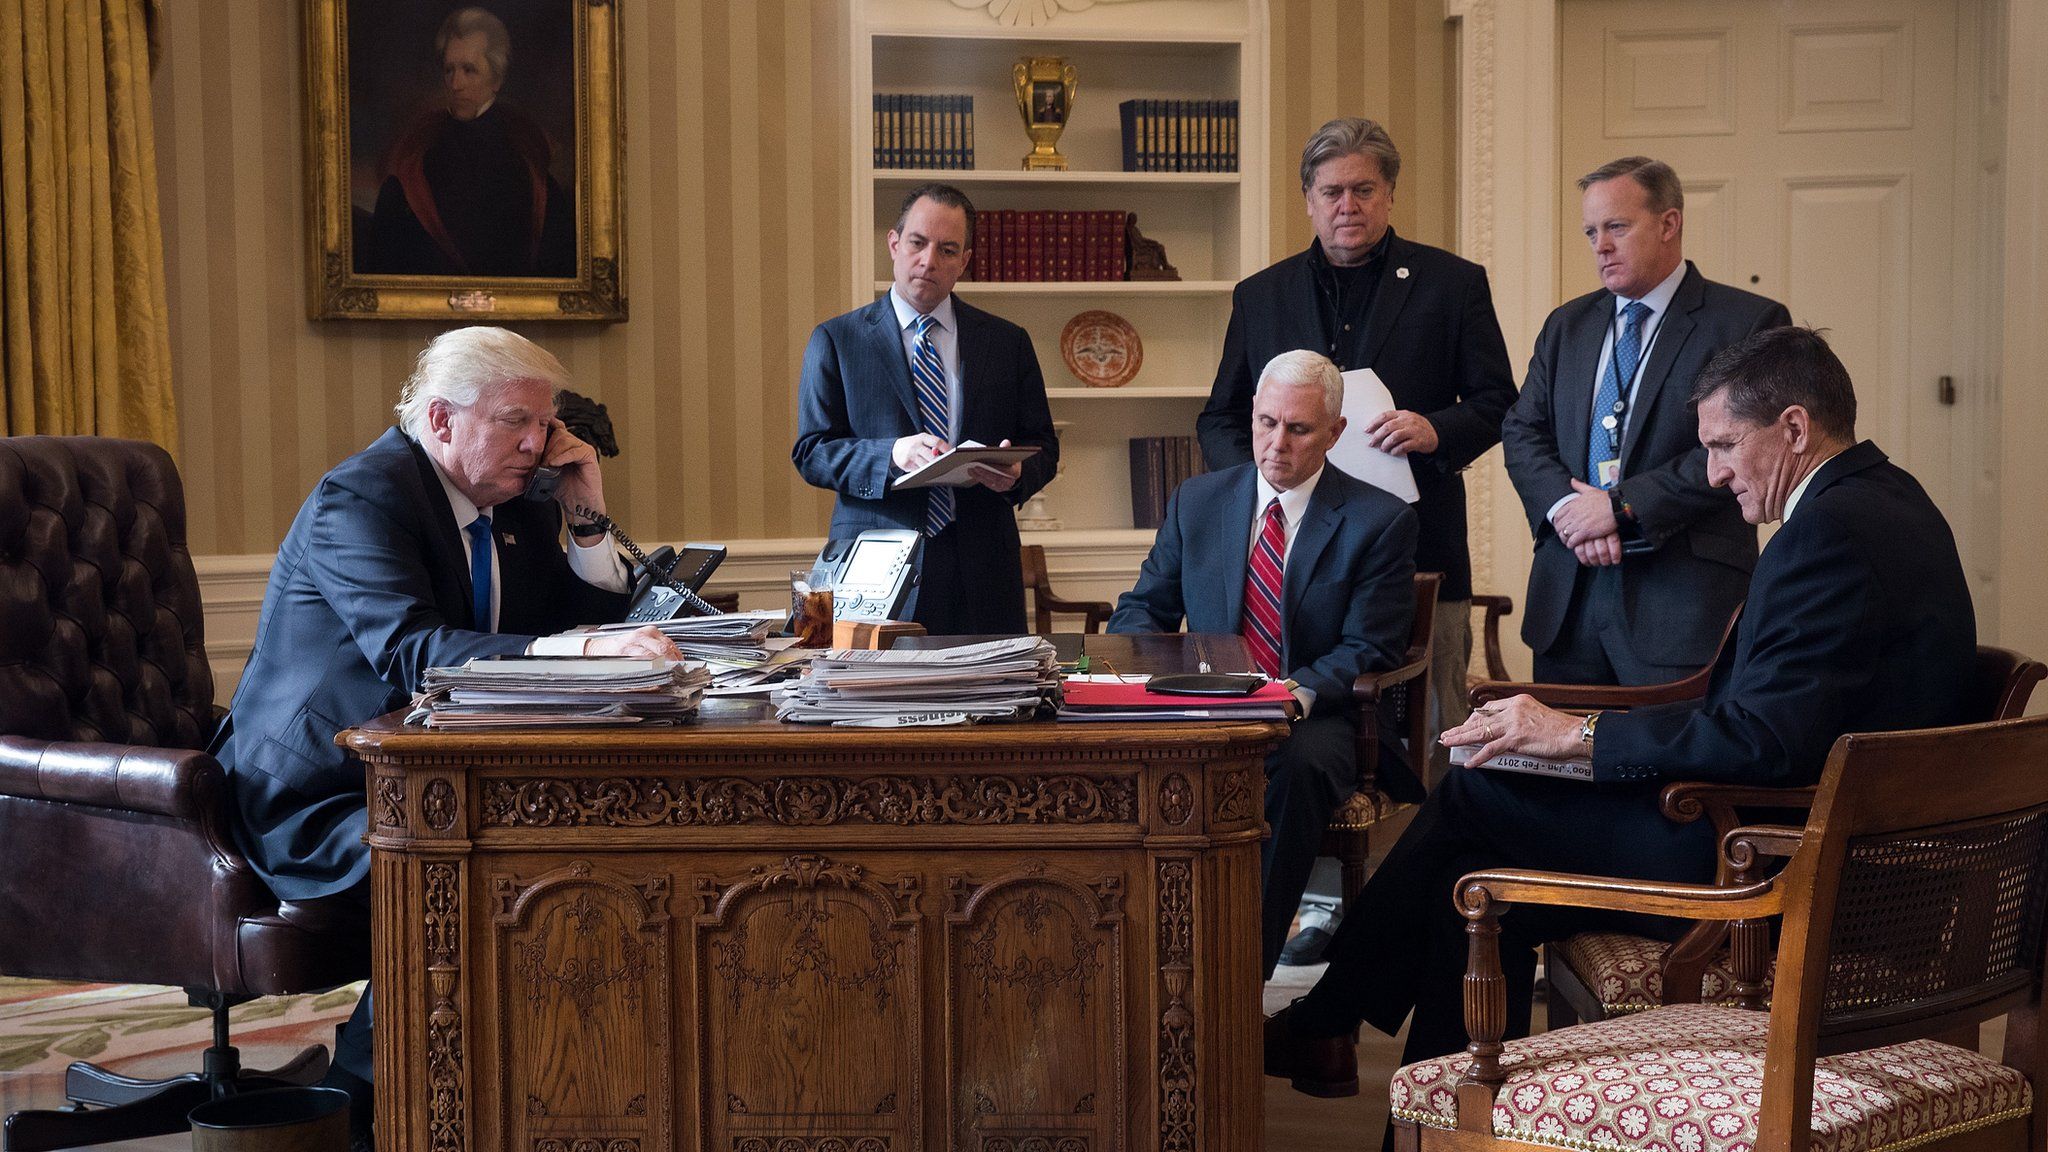 Photo from oval office on 28 January shows Trump and his close colleagues